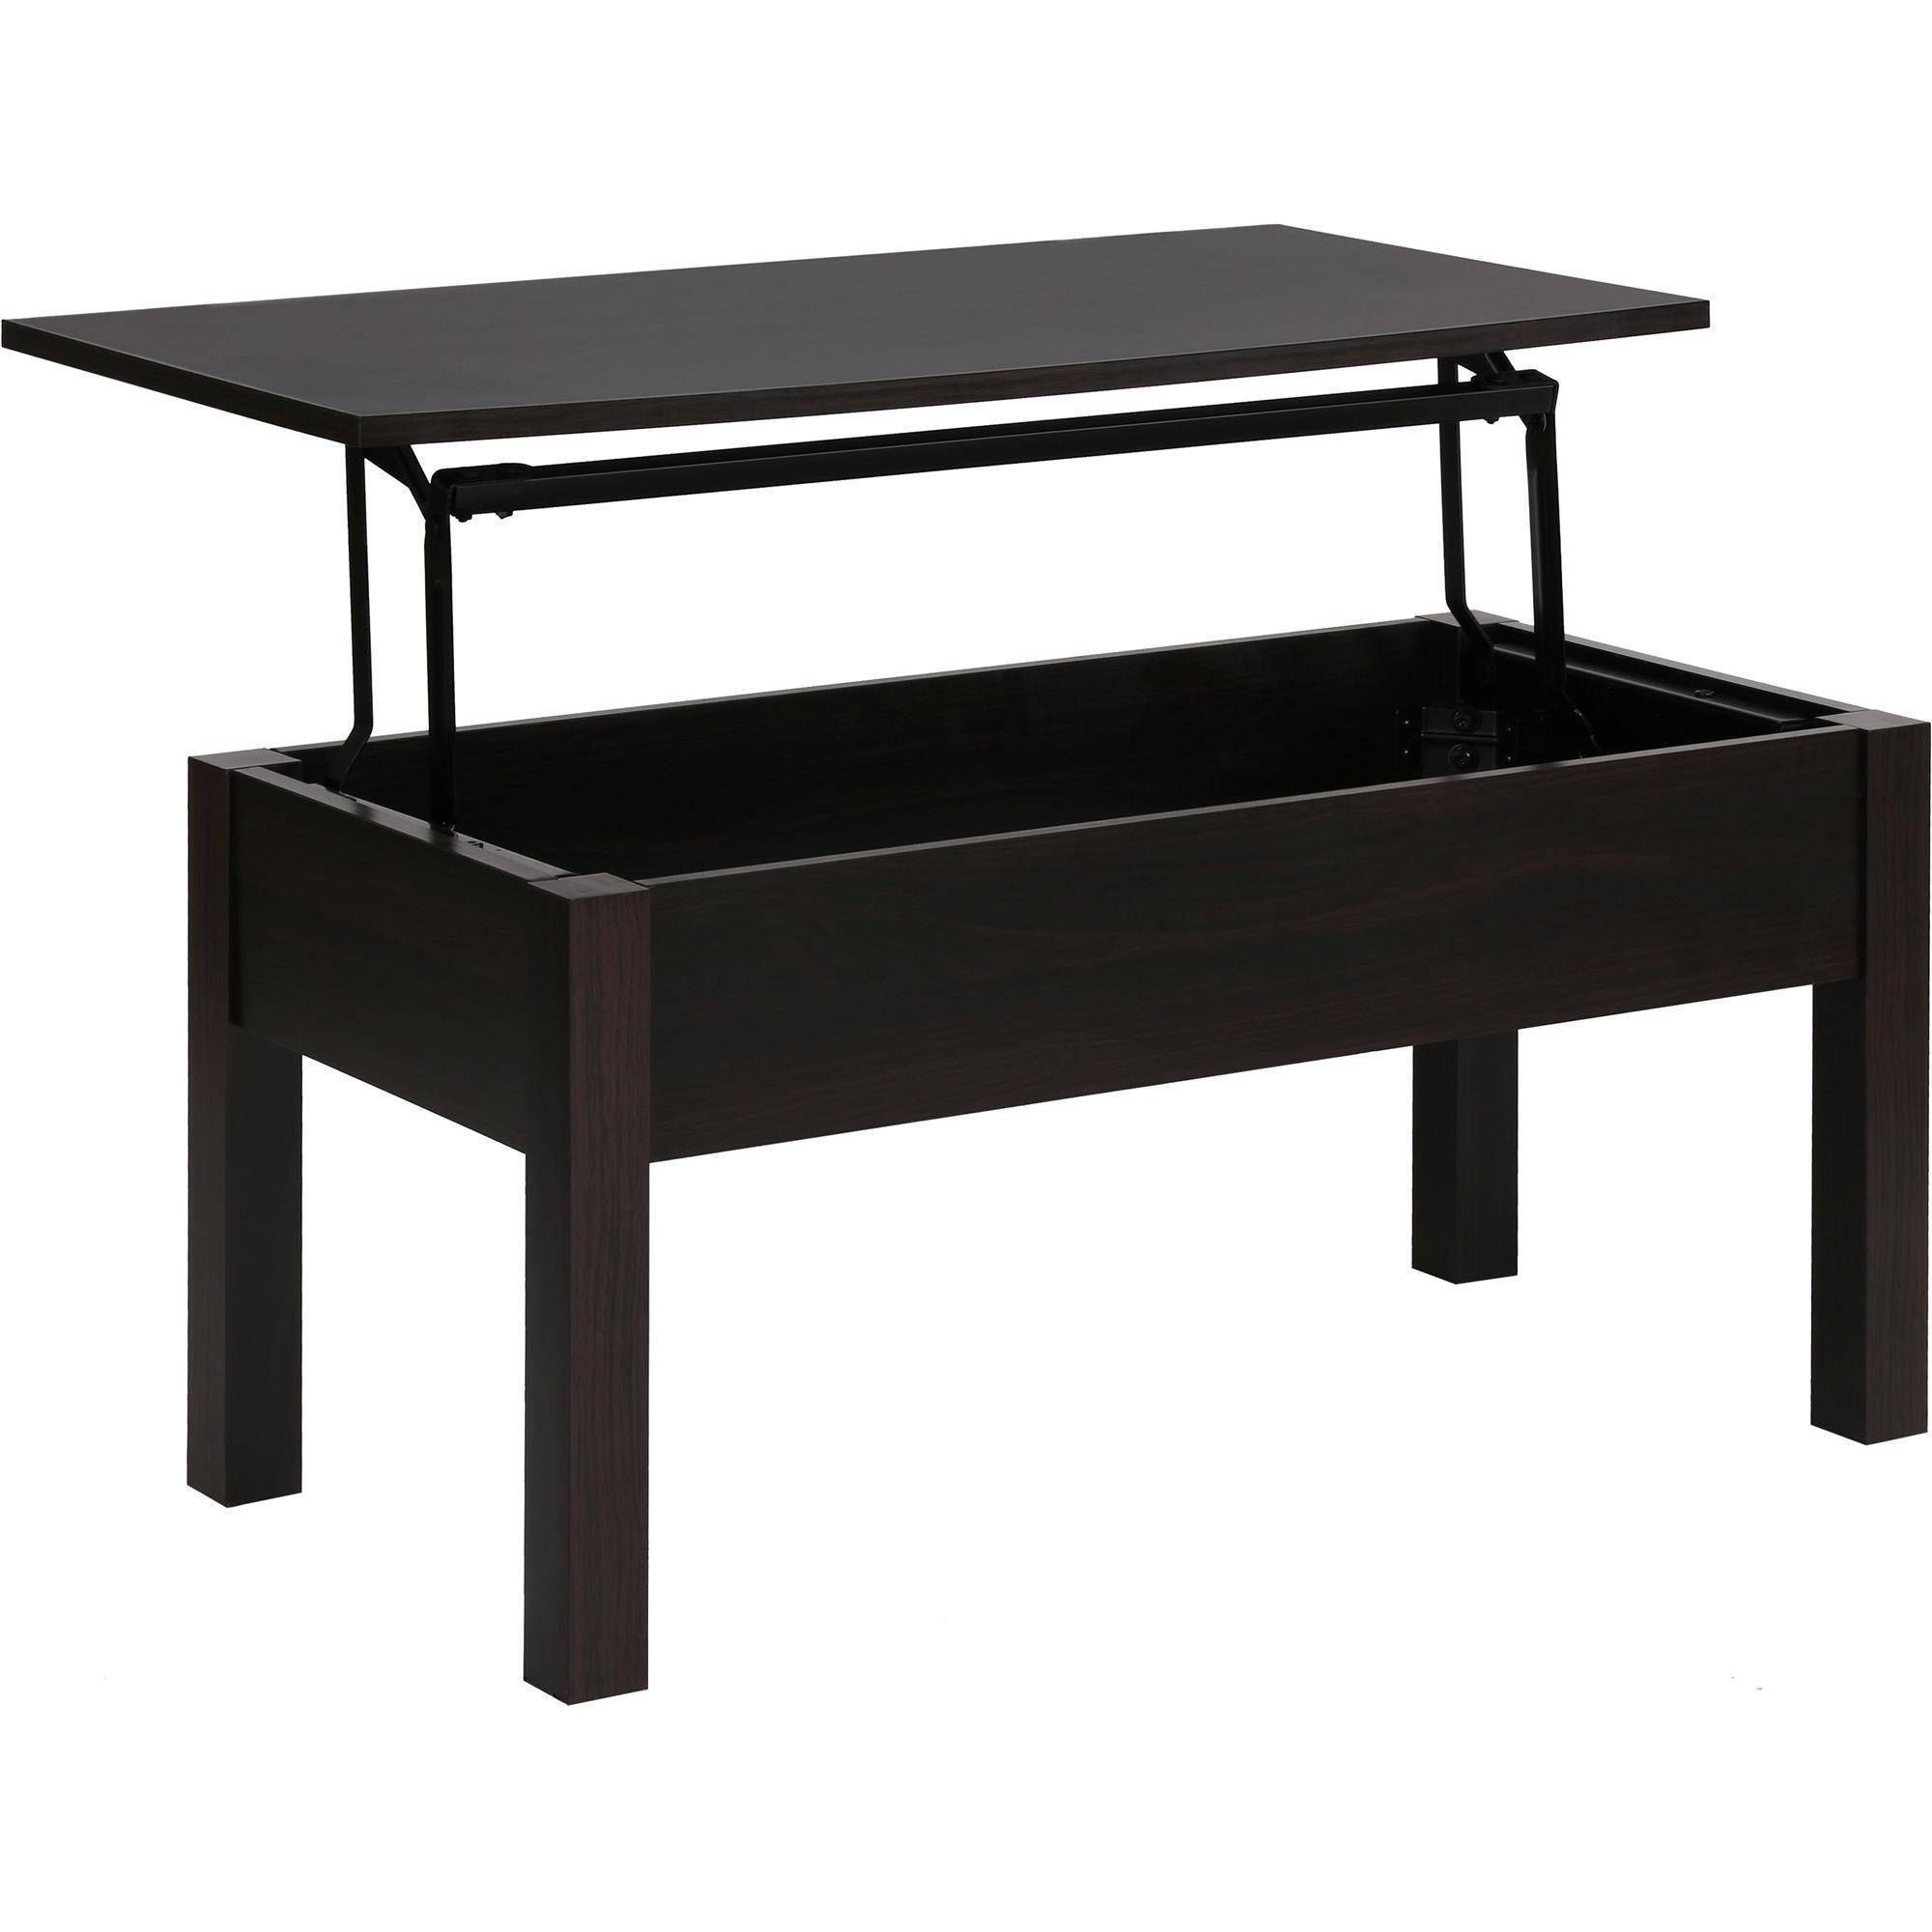 Quality Coffee Table That Lifts Up – Coffee Tables That Convert To Pertaining To Quality Coffee Tables (View 29 of 30)